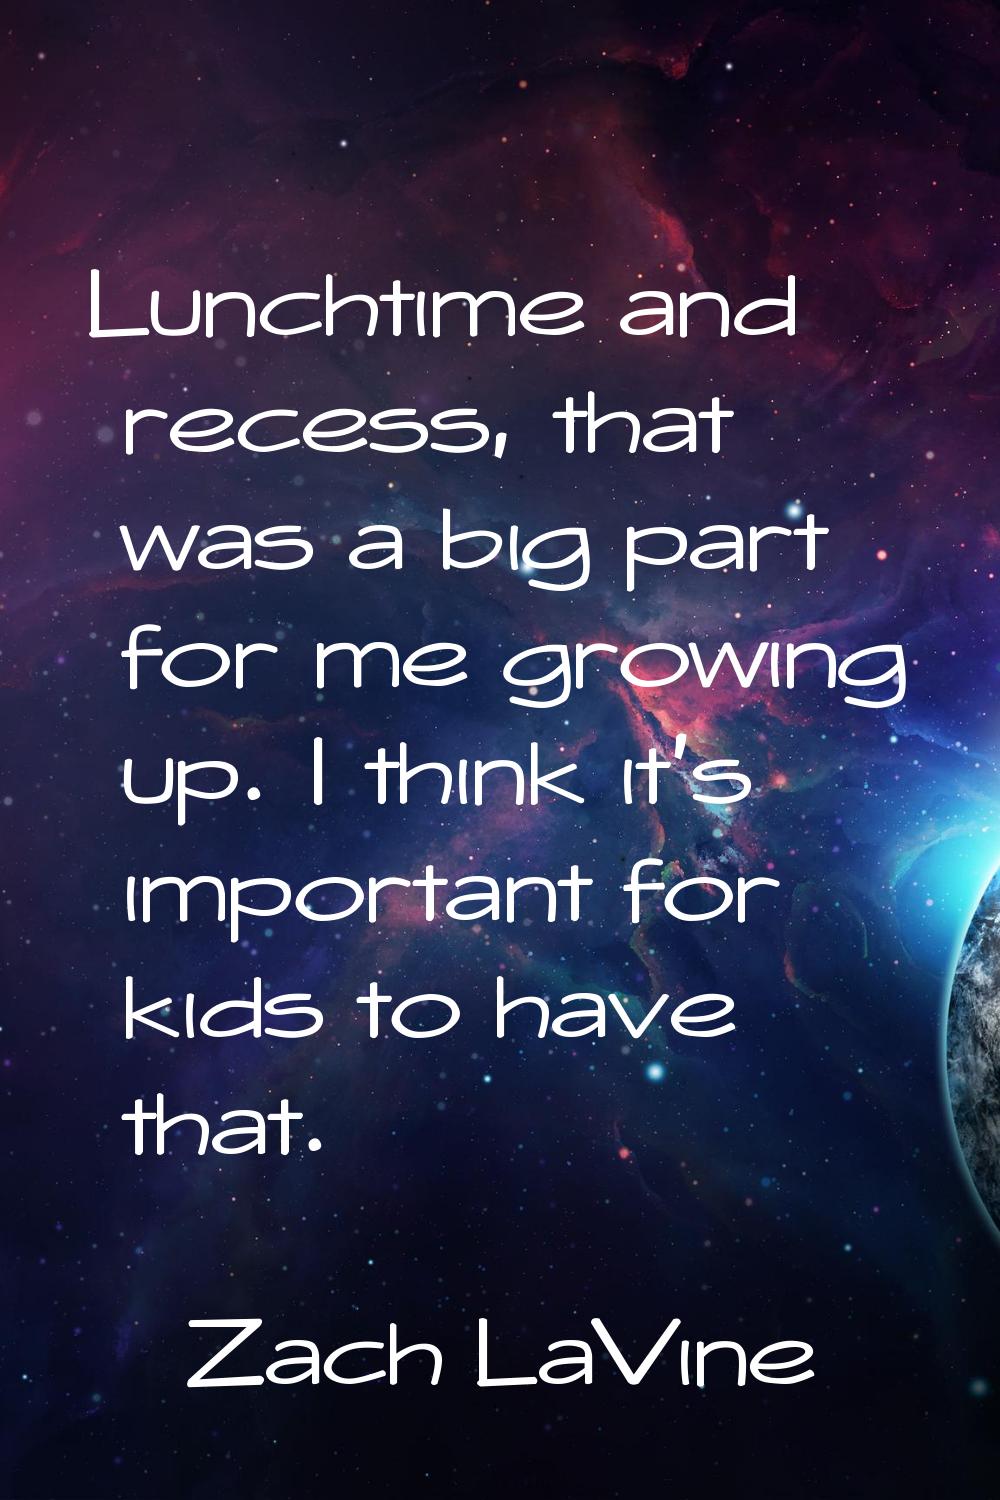 Lunchtime and recess, that was a big part for me growing up. I think it's important for kids to hav